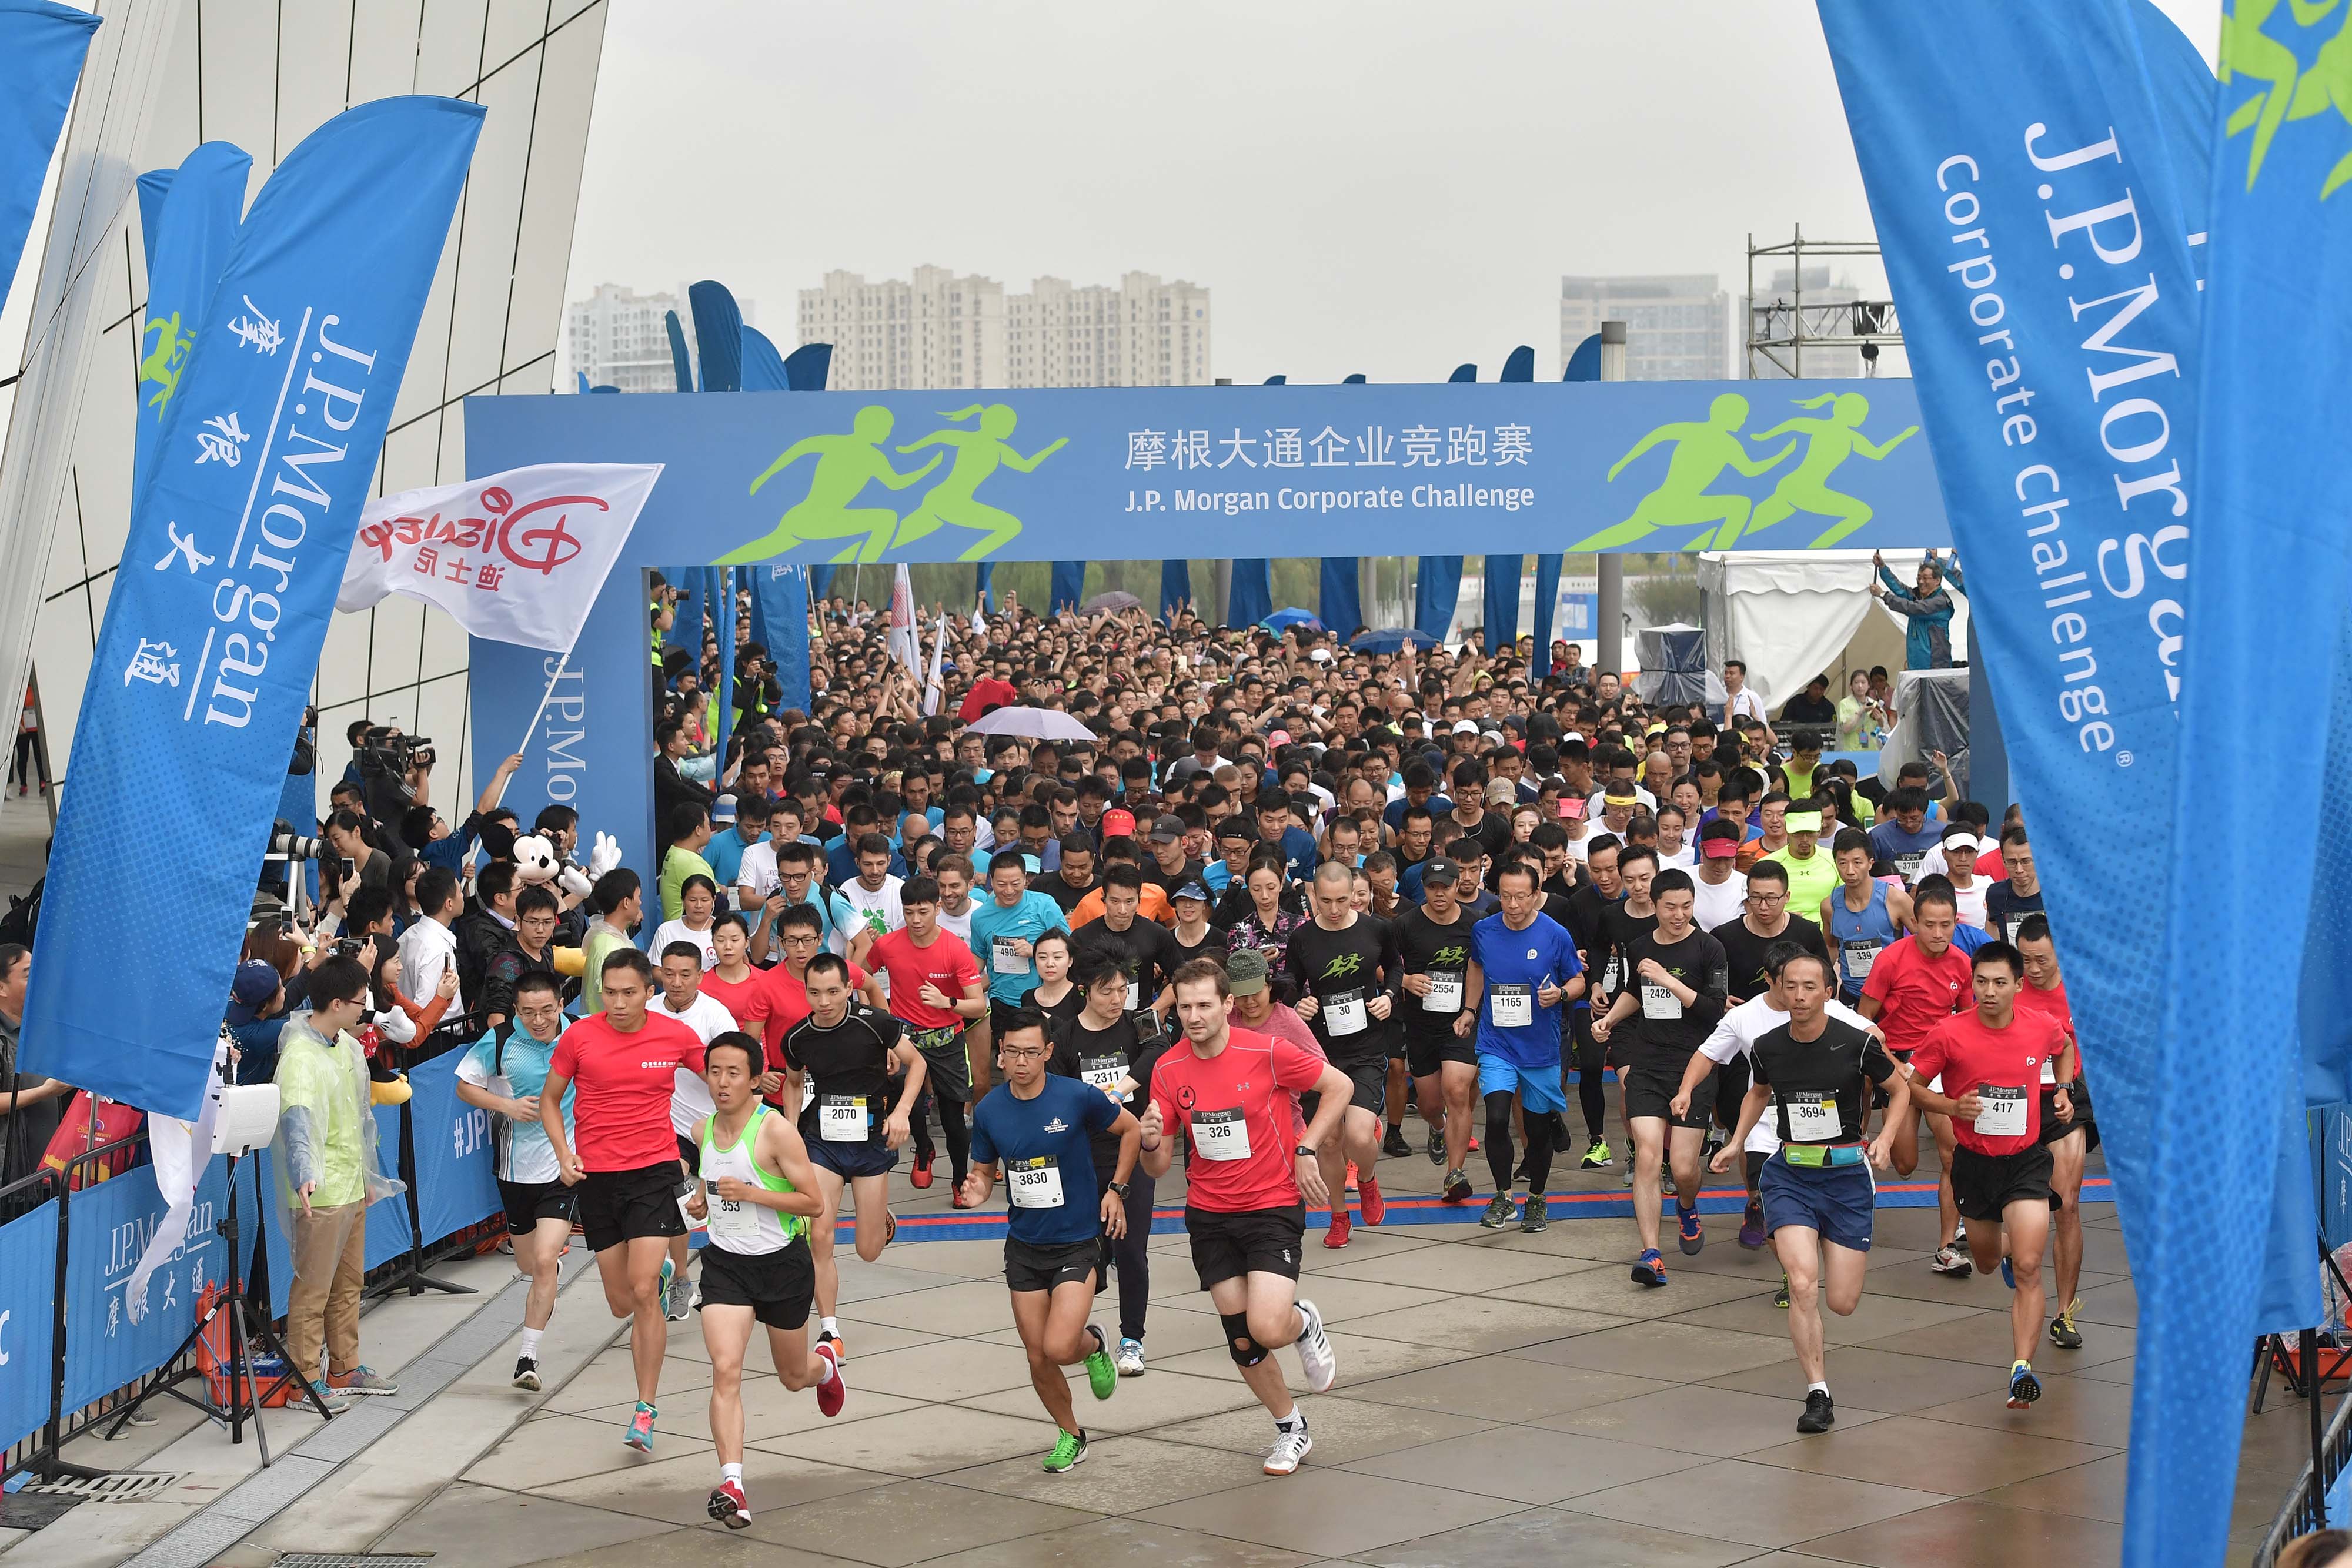 Runners are off at the 2016 J.P. Morgan Corporate Challenge at Shanghai Oriental Sports Center.